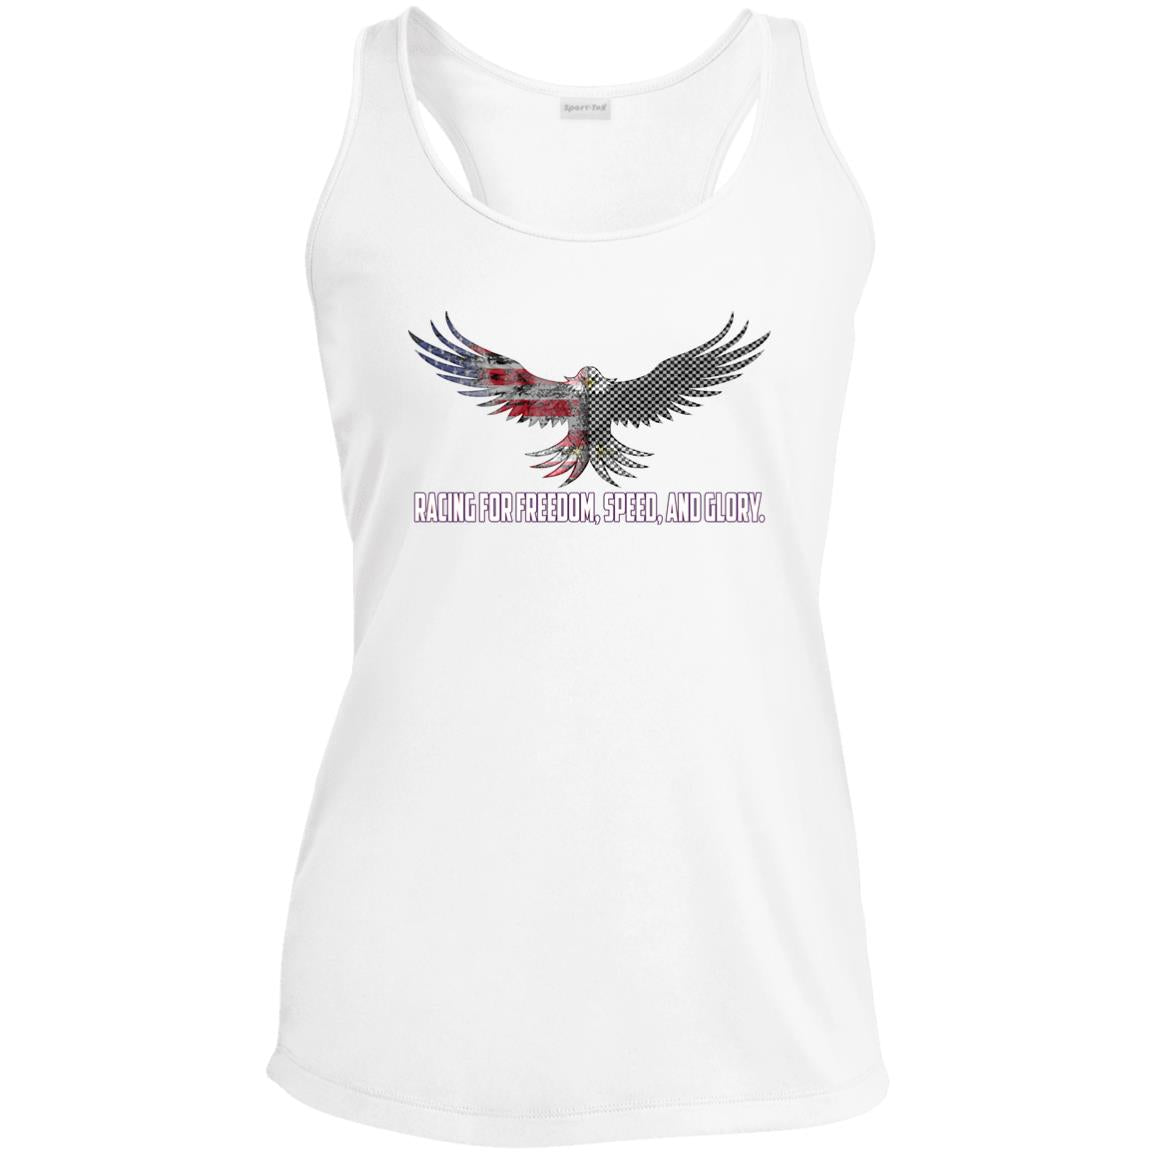 Racing For Freedom, Speed, And Glory Ladies' Performance Racerback Tank